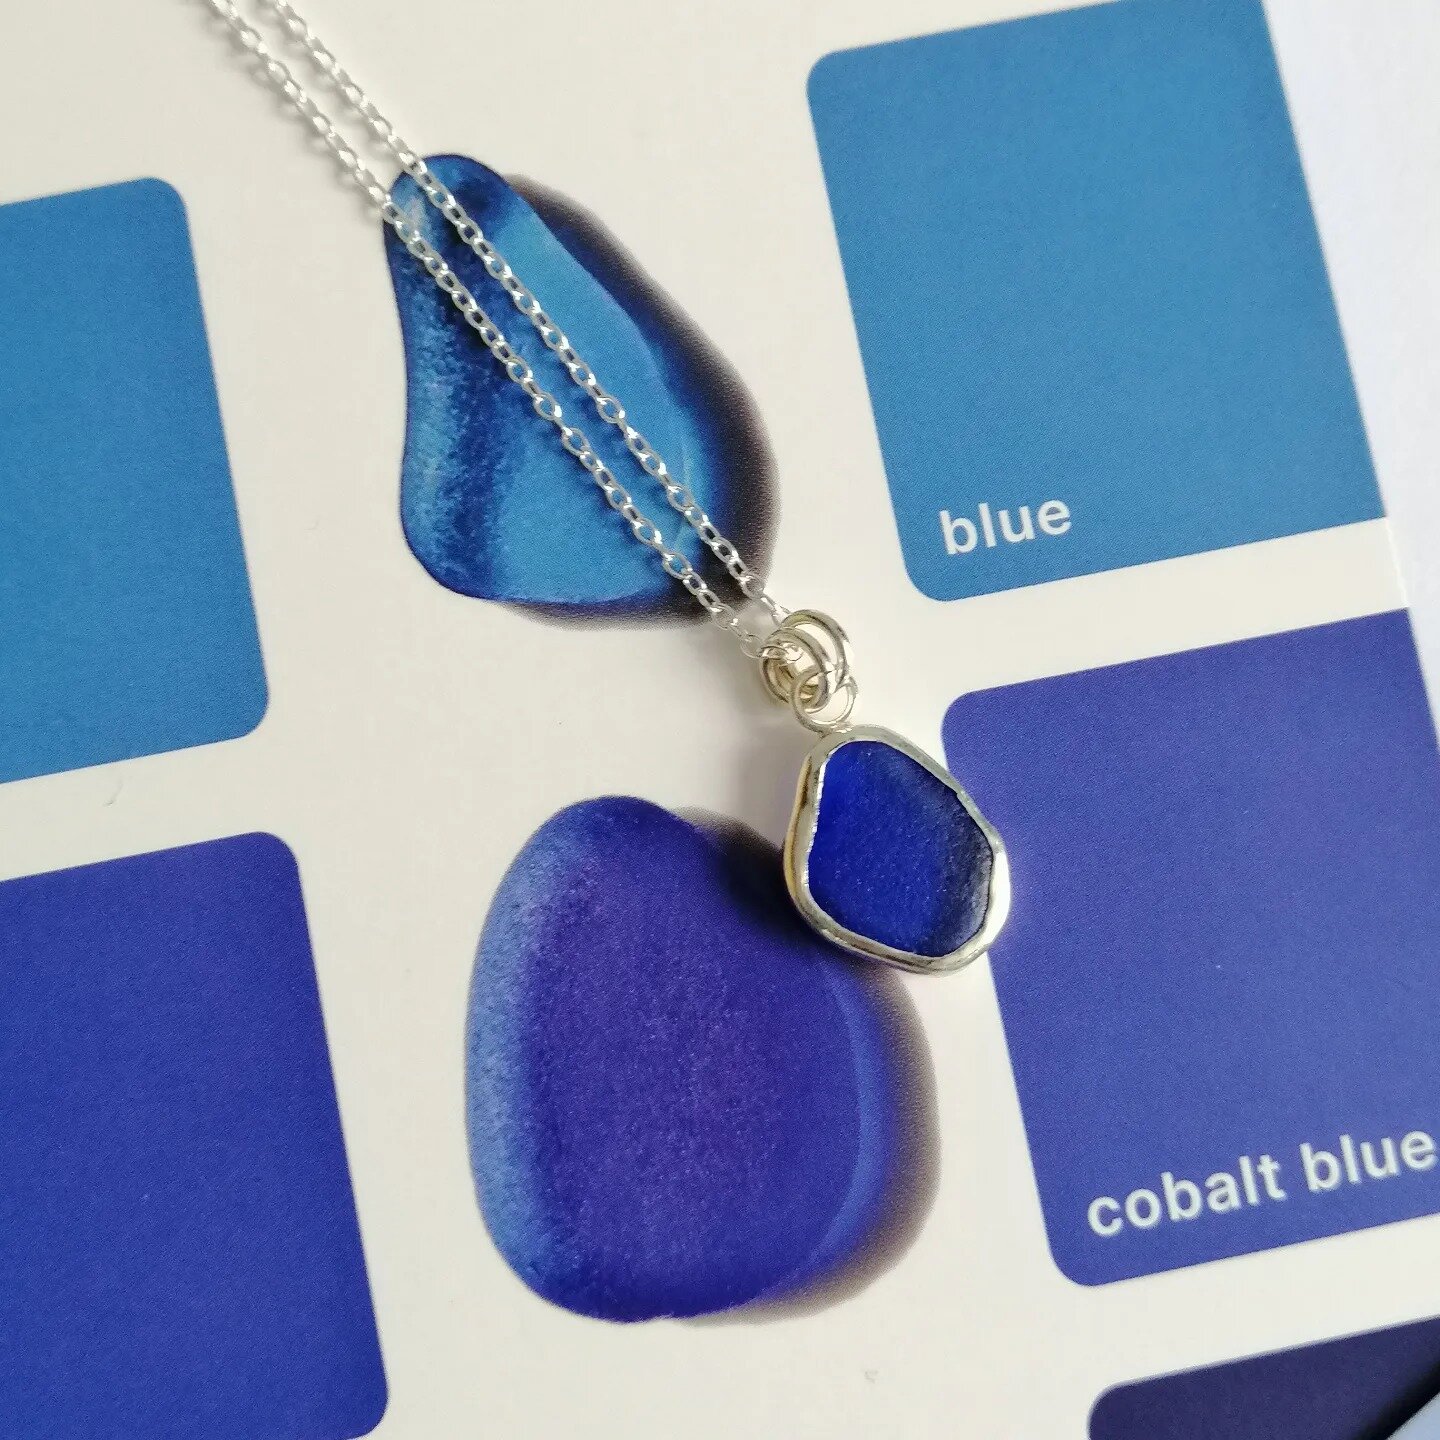 I finally got my hands on my very own Seaglass index from @seaglassindex 🤩🌊 Now I can actually start adding colour references to my jewellery. This one as you can see is a stunning cobalt blue. Hoping to pop this beauty on the website later (unless